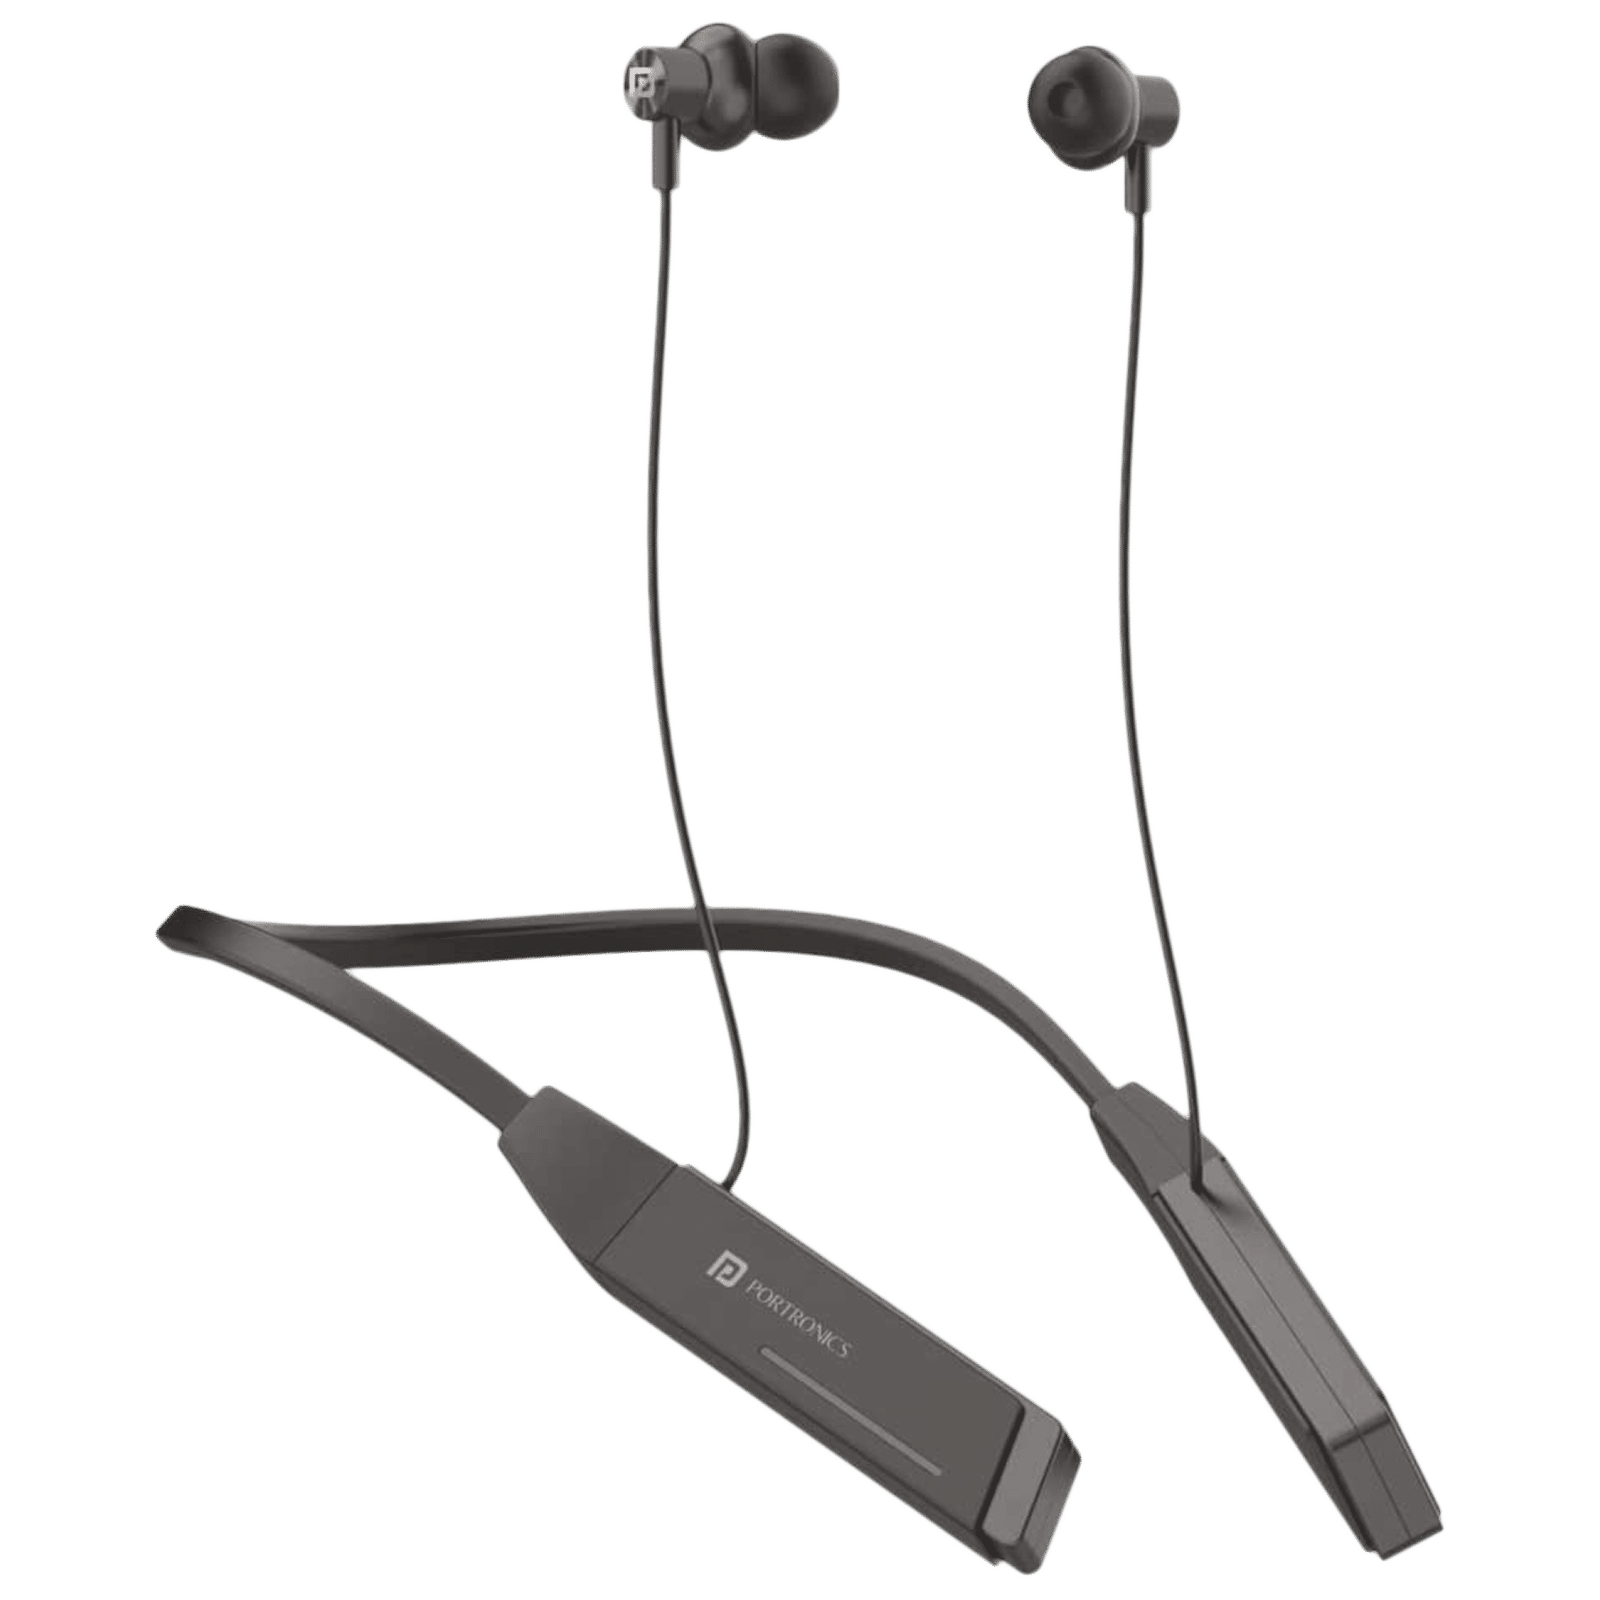 Buy realme Buds Wireless 3 RMA 2119 Neckband with Active Noise Cancellation  (IP55 Water Resistant, Google Fast Pairing, Pure Black) Online - Croma